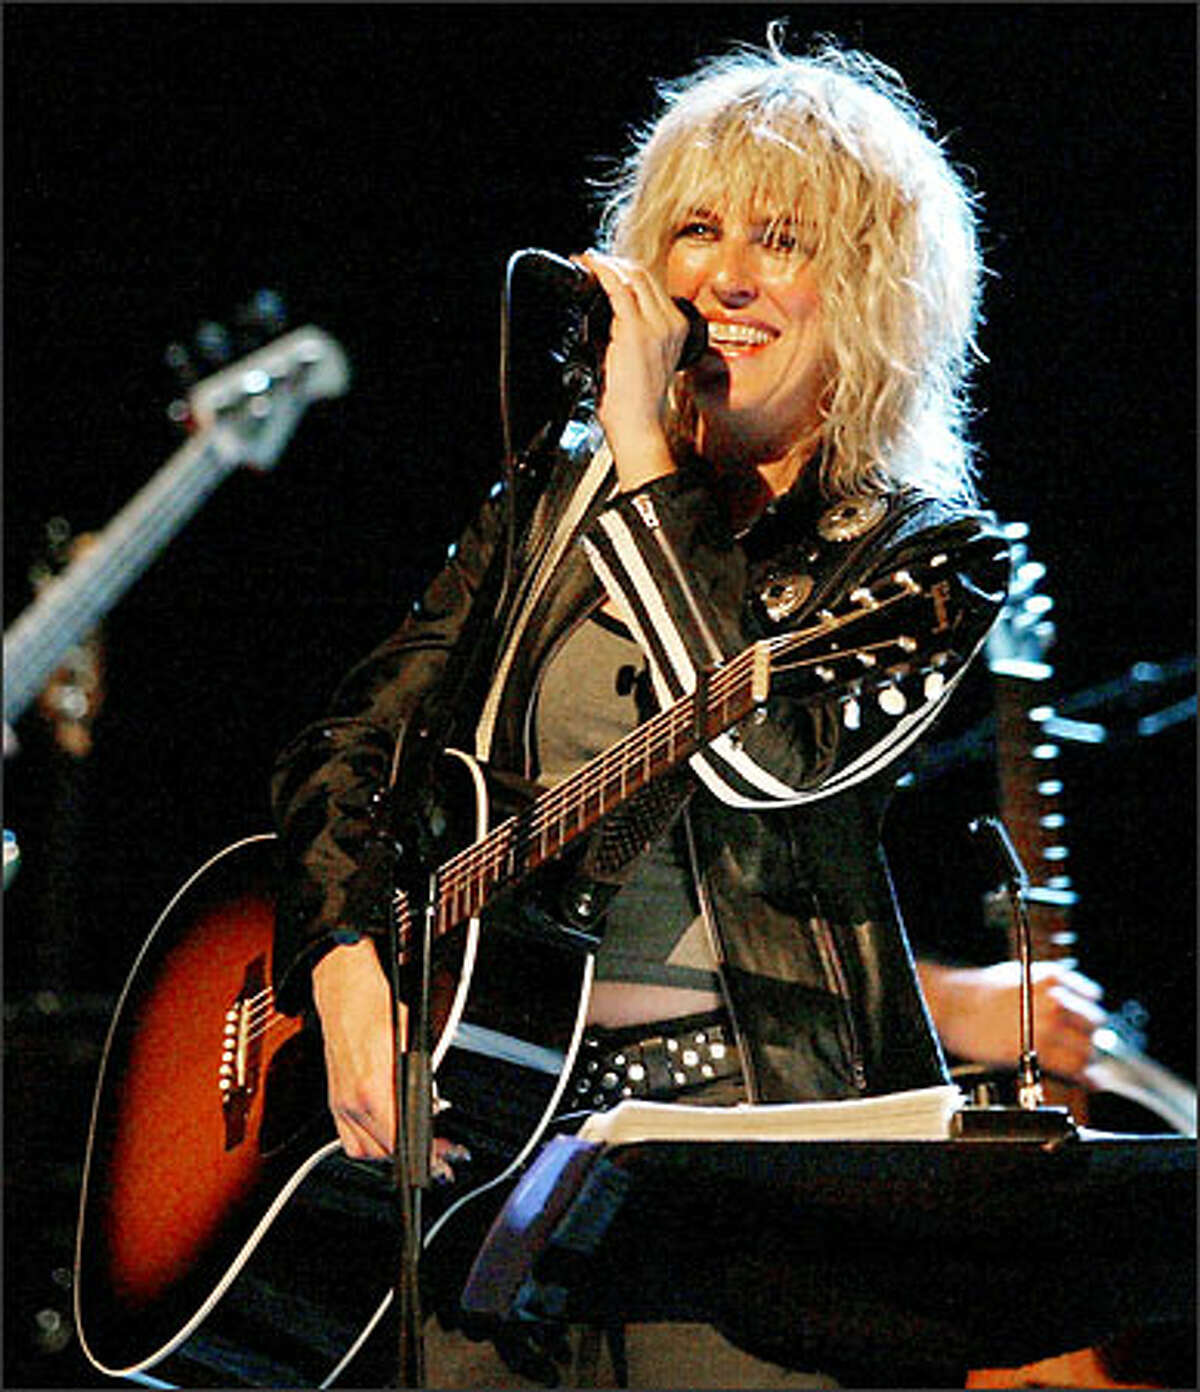 Lucinda Williams invited the audience at The Moore to come down to the stage and dance, and when they did, she said, "Now we've turned this place into a rock club."